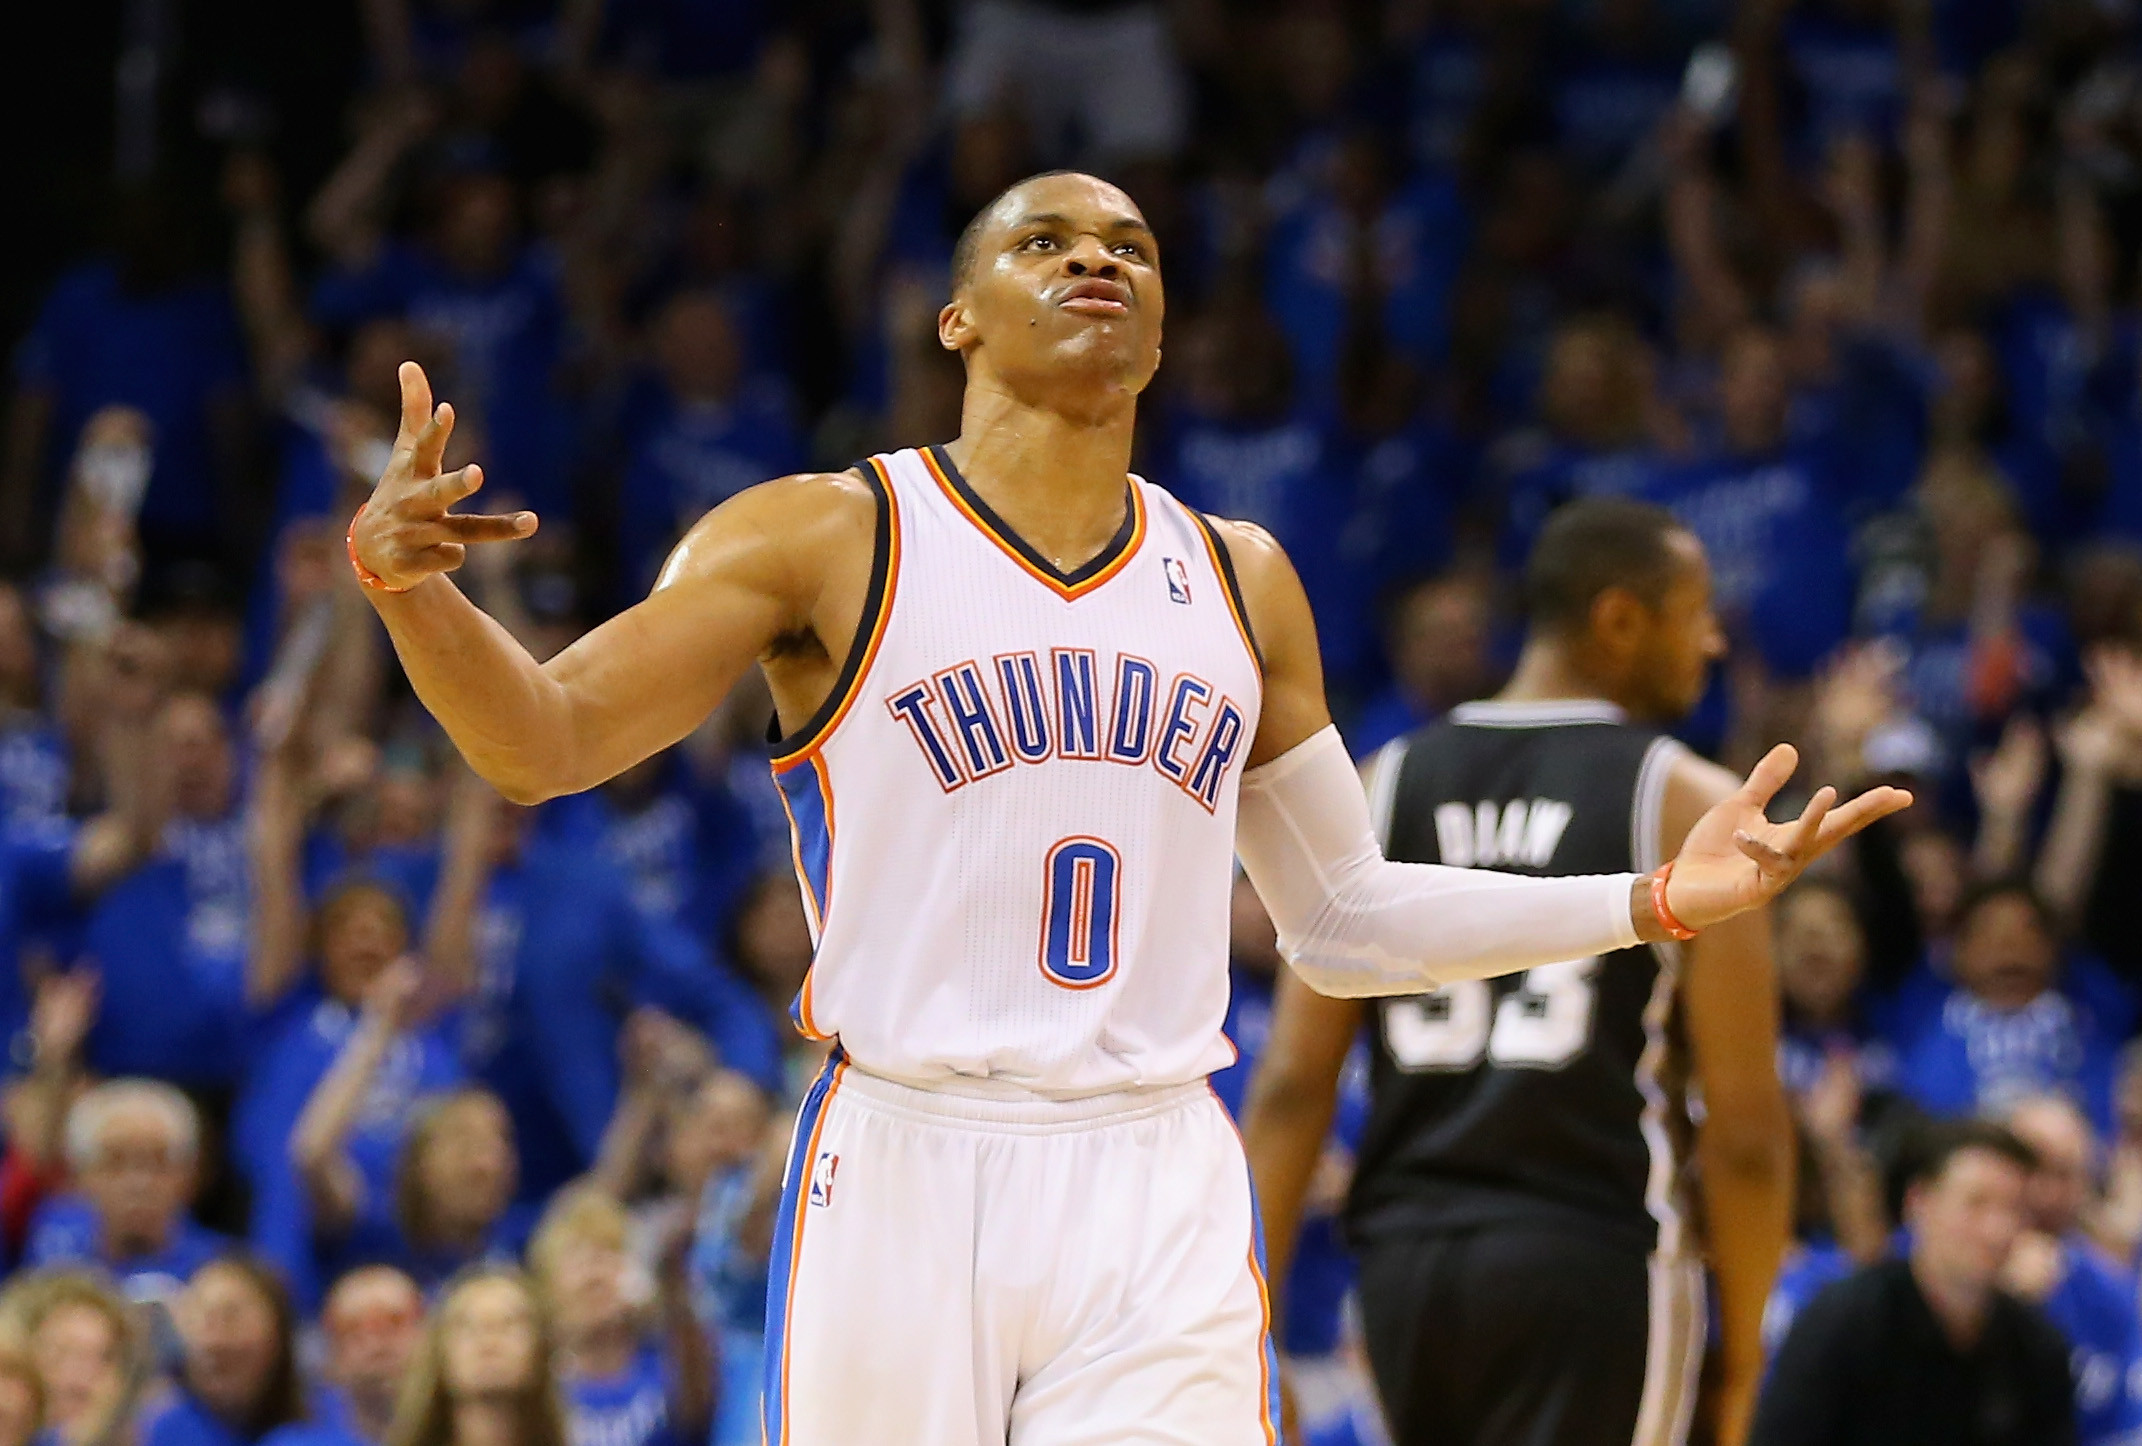 Russell westbrook There goes Russell Westbrook, turning an easy pass into a turnover